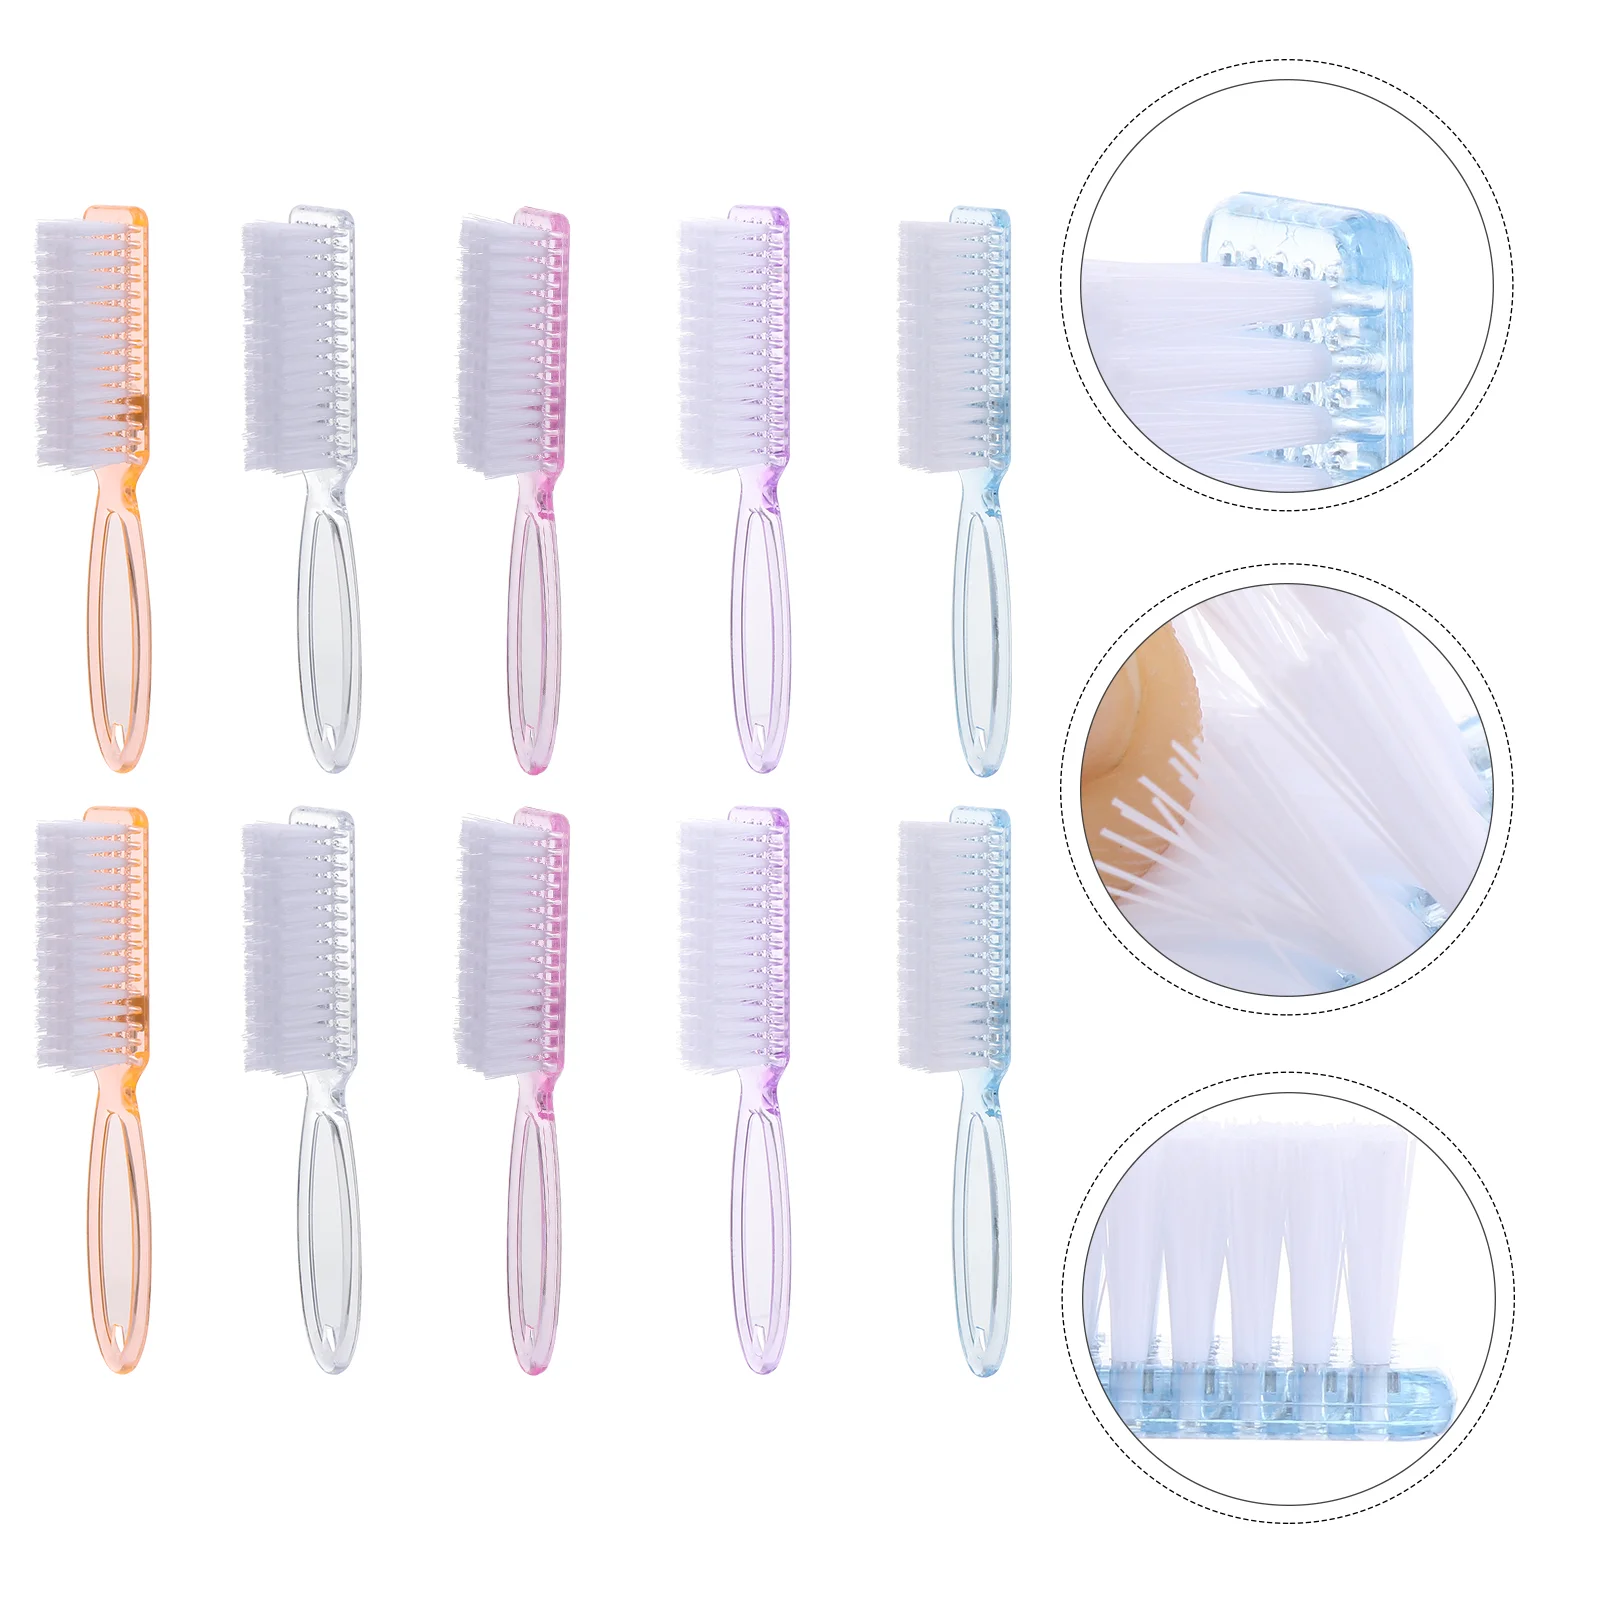 

Brush Nail Cleaning Fingernail Handle Brushes Cleaner Scrub Hand Nails Manicure Toe Grip Scrubbing Plastic Pedicure Care Toes